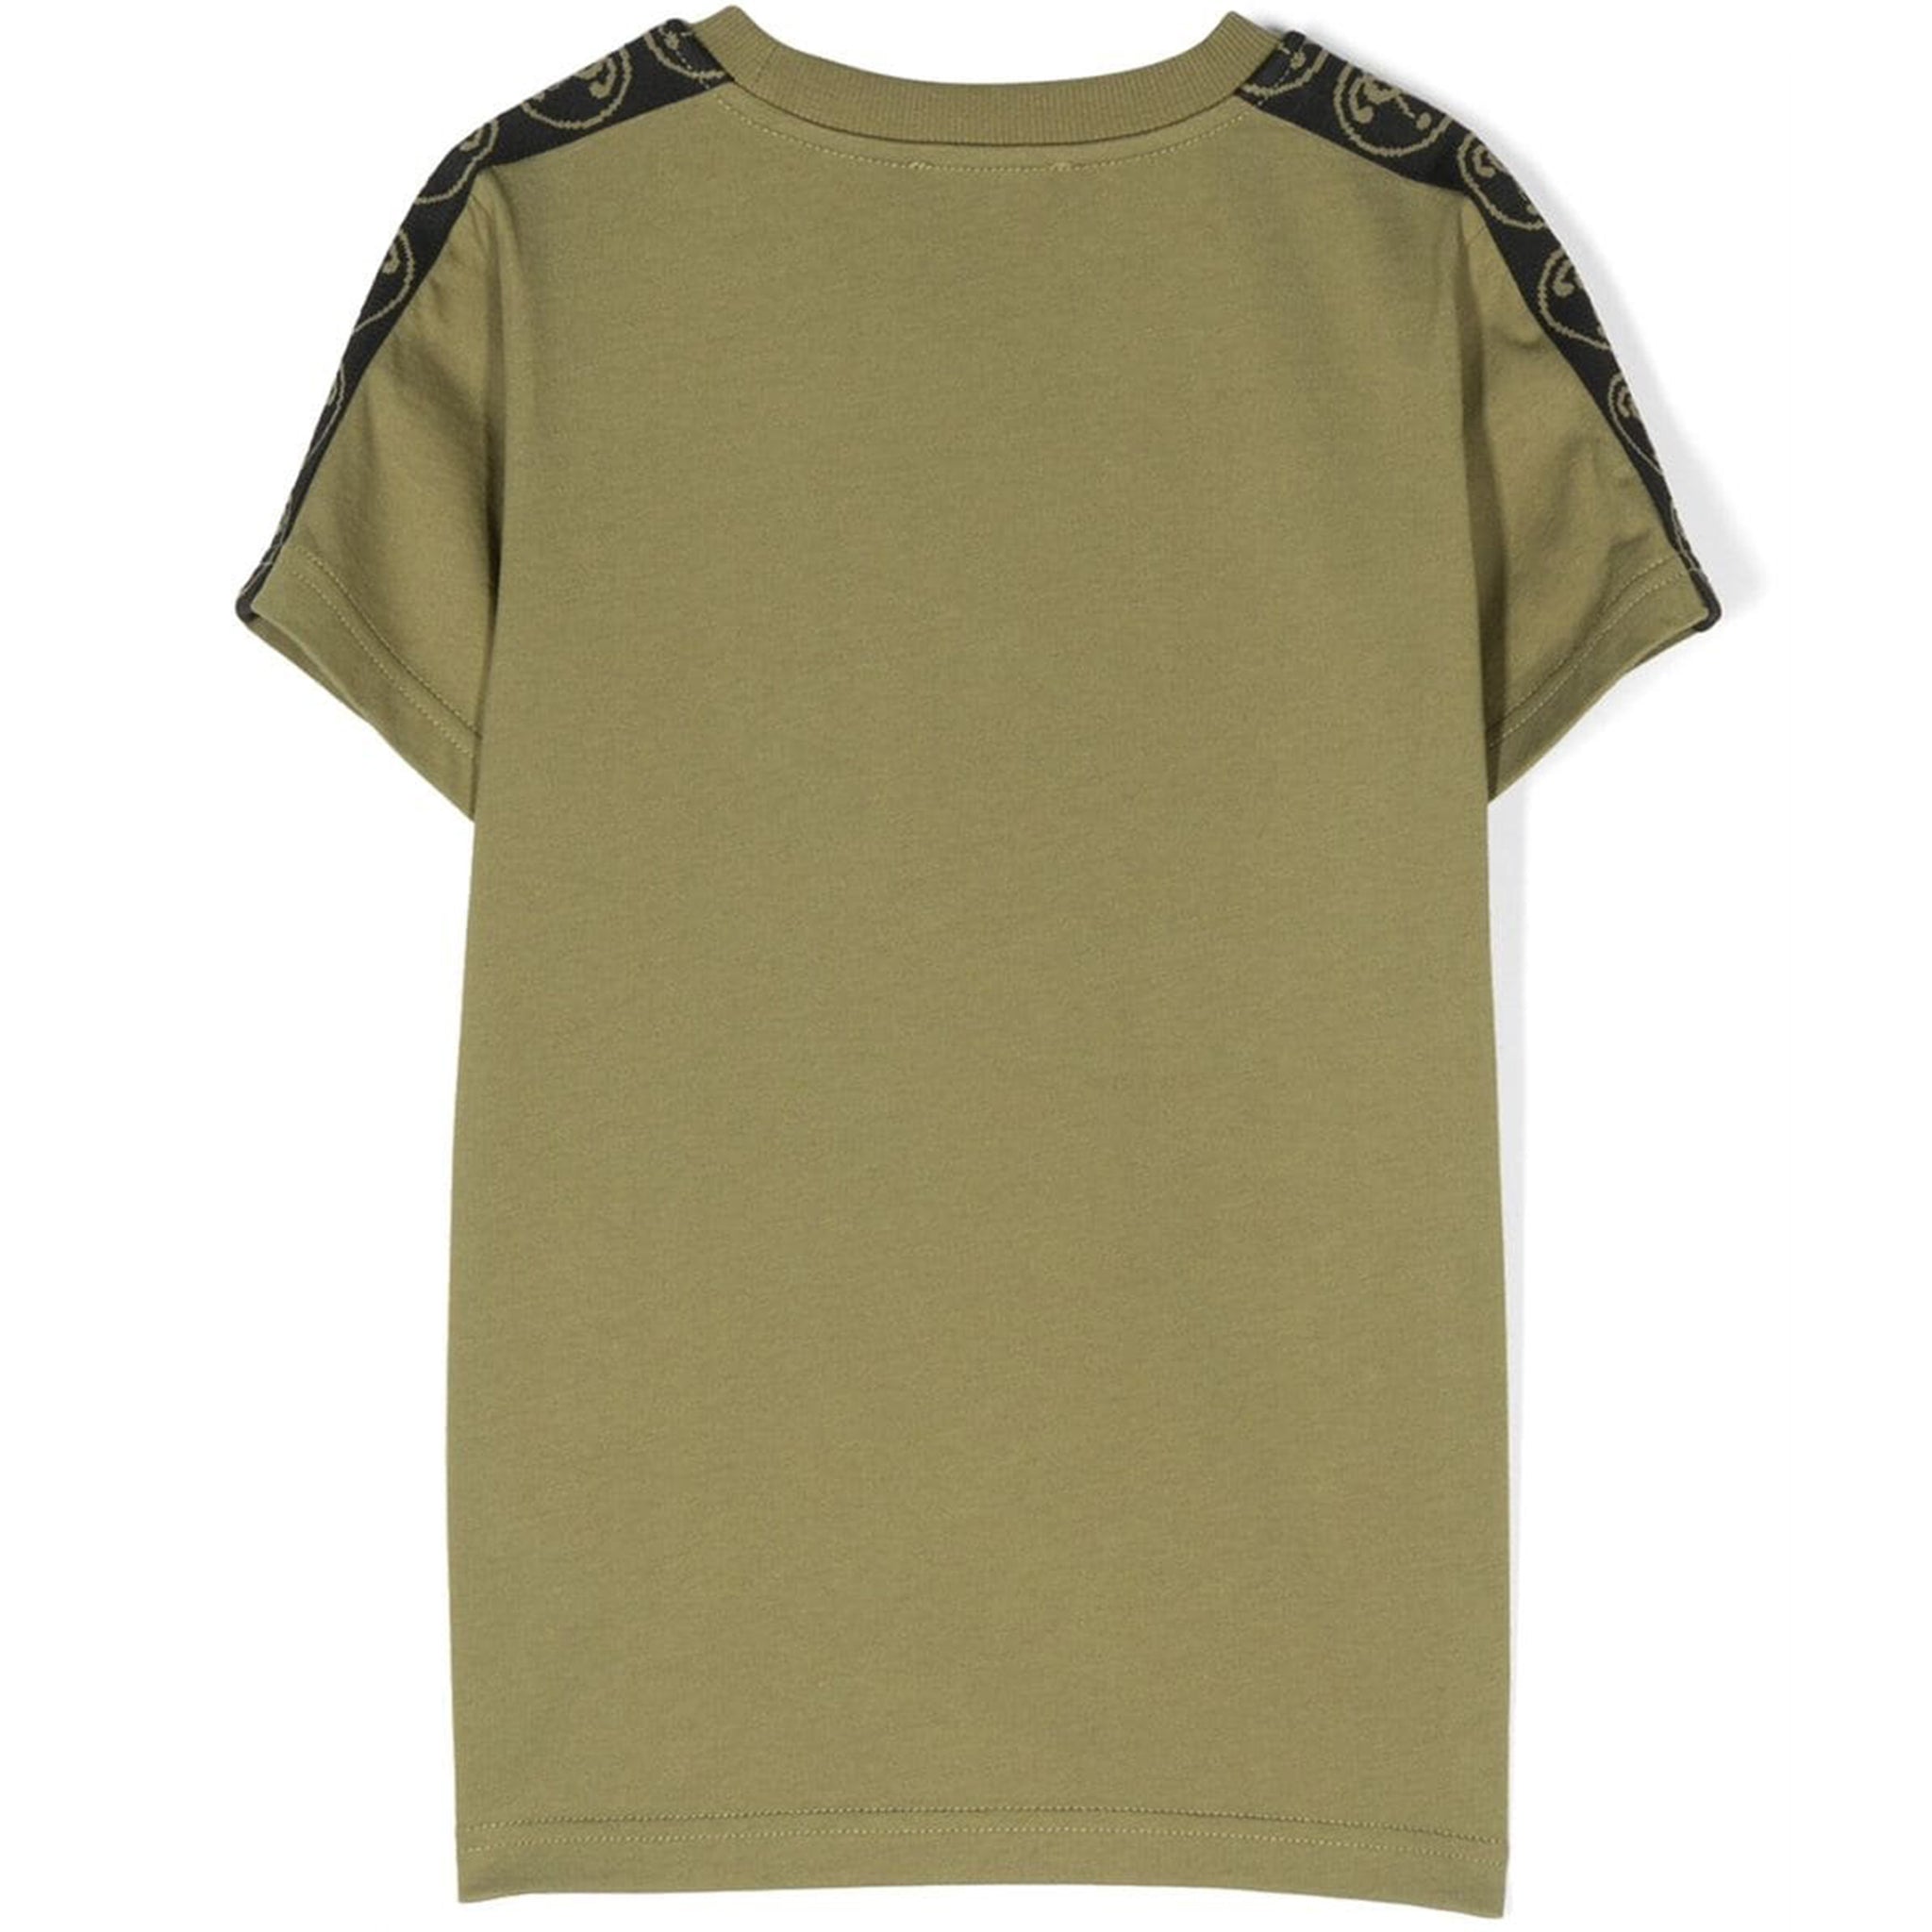 T-shirt Short Sleeve 4A Olive 100%CO